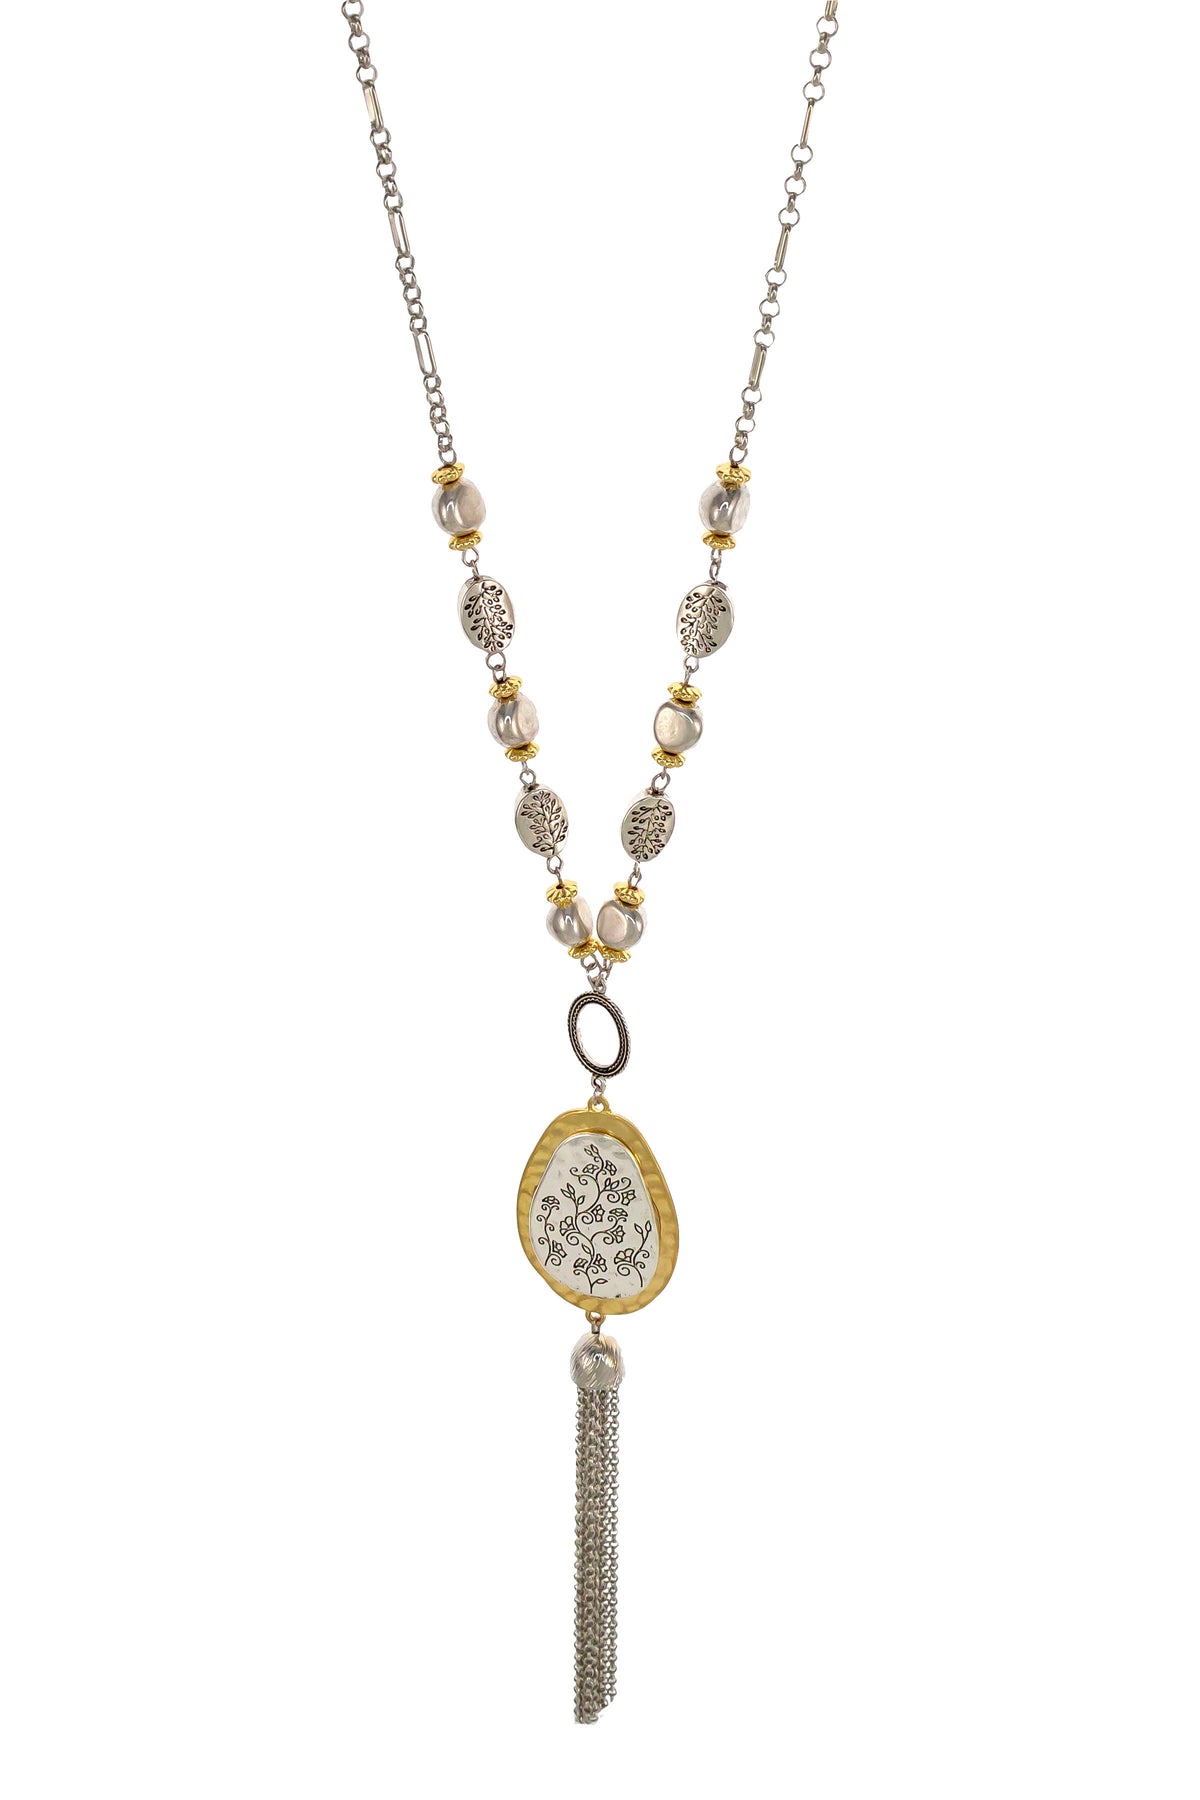 Ruby Rd. Tassel Necklace in Two-Tone